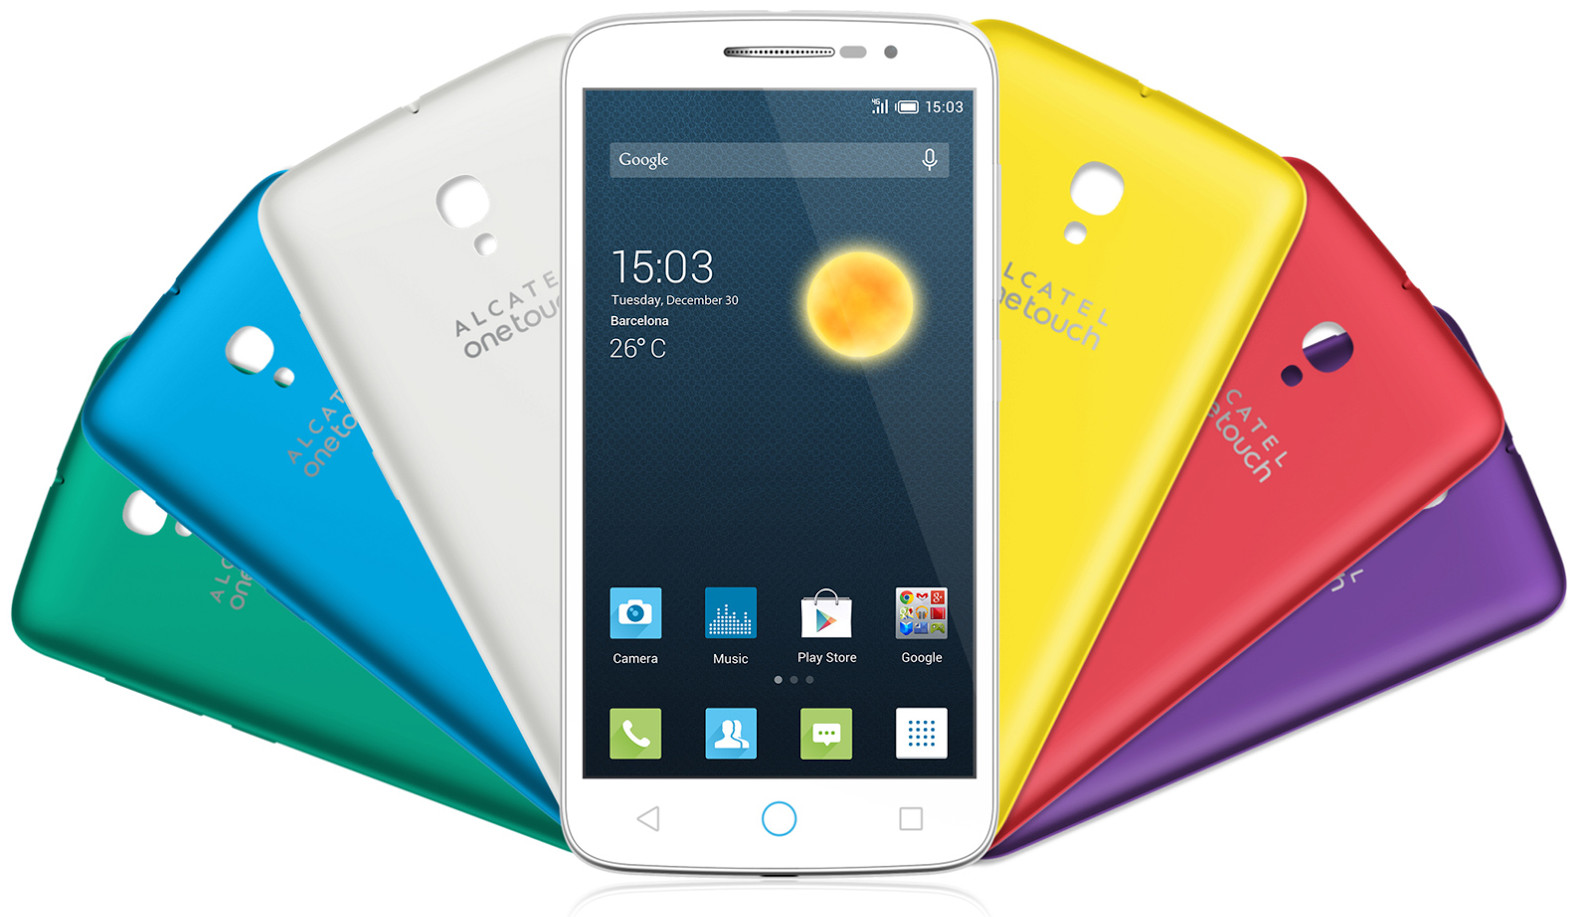 How to boot into safe mode on Alcatel Pop 2 (4.5)